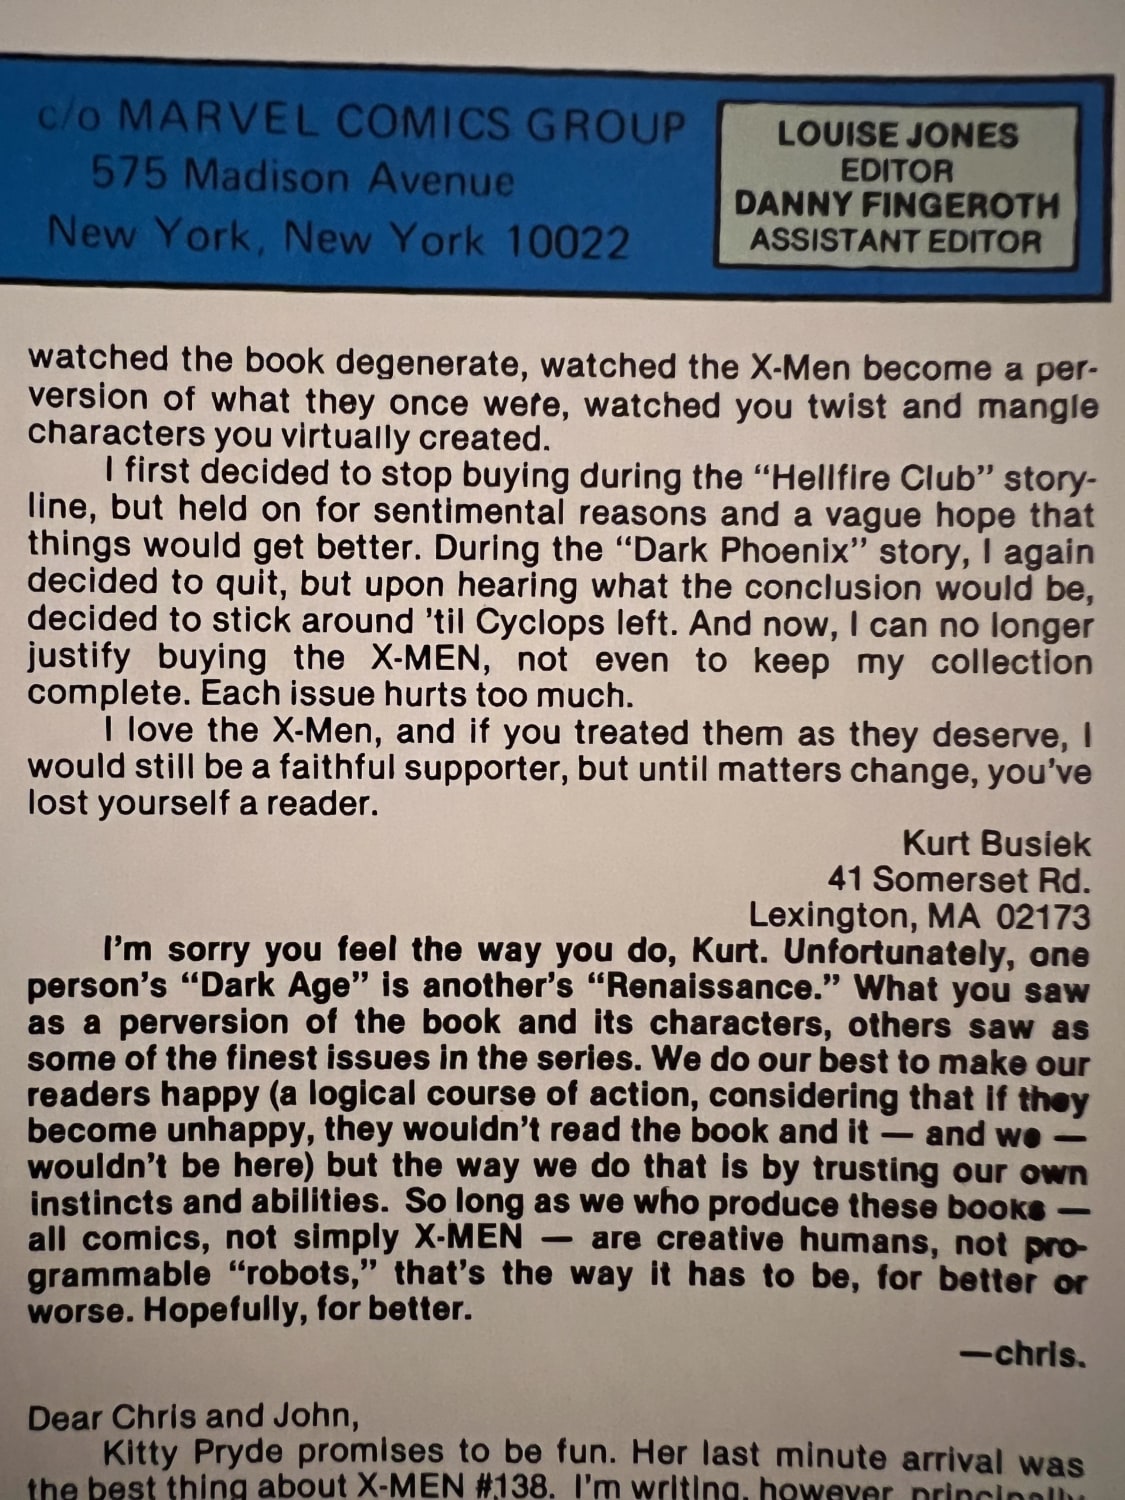 Haha a 20 year old Kurt Busiek got a hate letter published in UXM 143. Anyone know any other famous folks in letter cols?